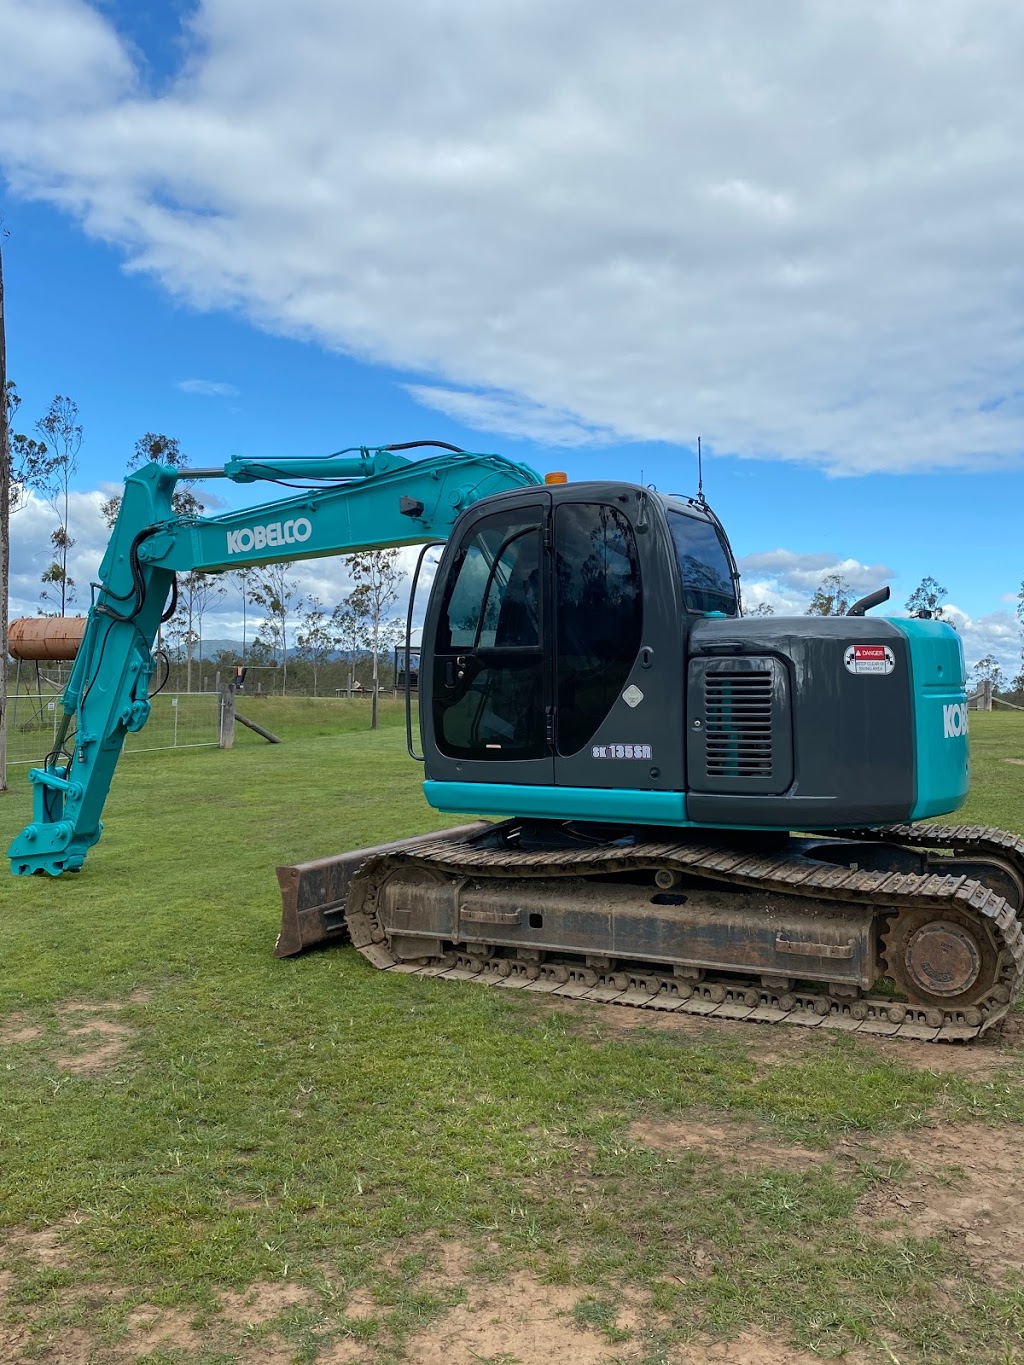 Dig That Earthmoving and Excavations Pty Ltd | general contractor | 3-Apr-20 AU, 26 Thompsons Rd, Mount Urah QLD 4650, Australia | 0424985871 OR +61 424 985 871